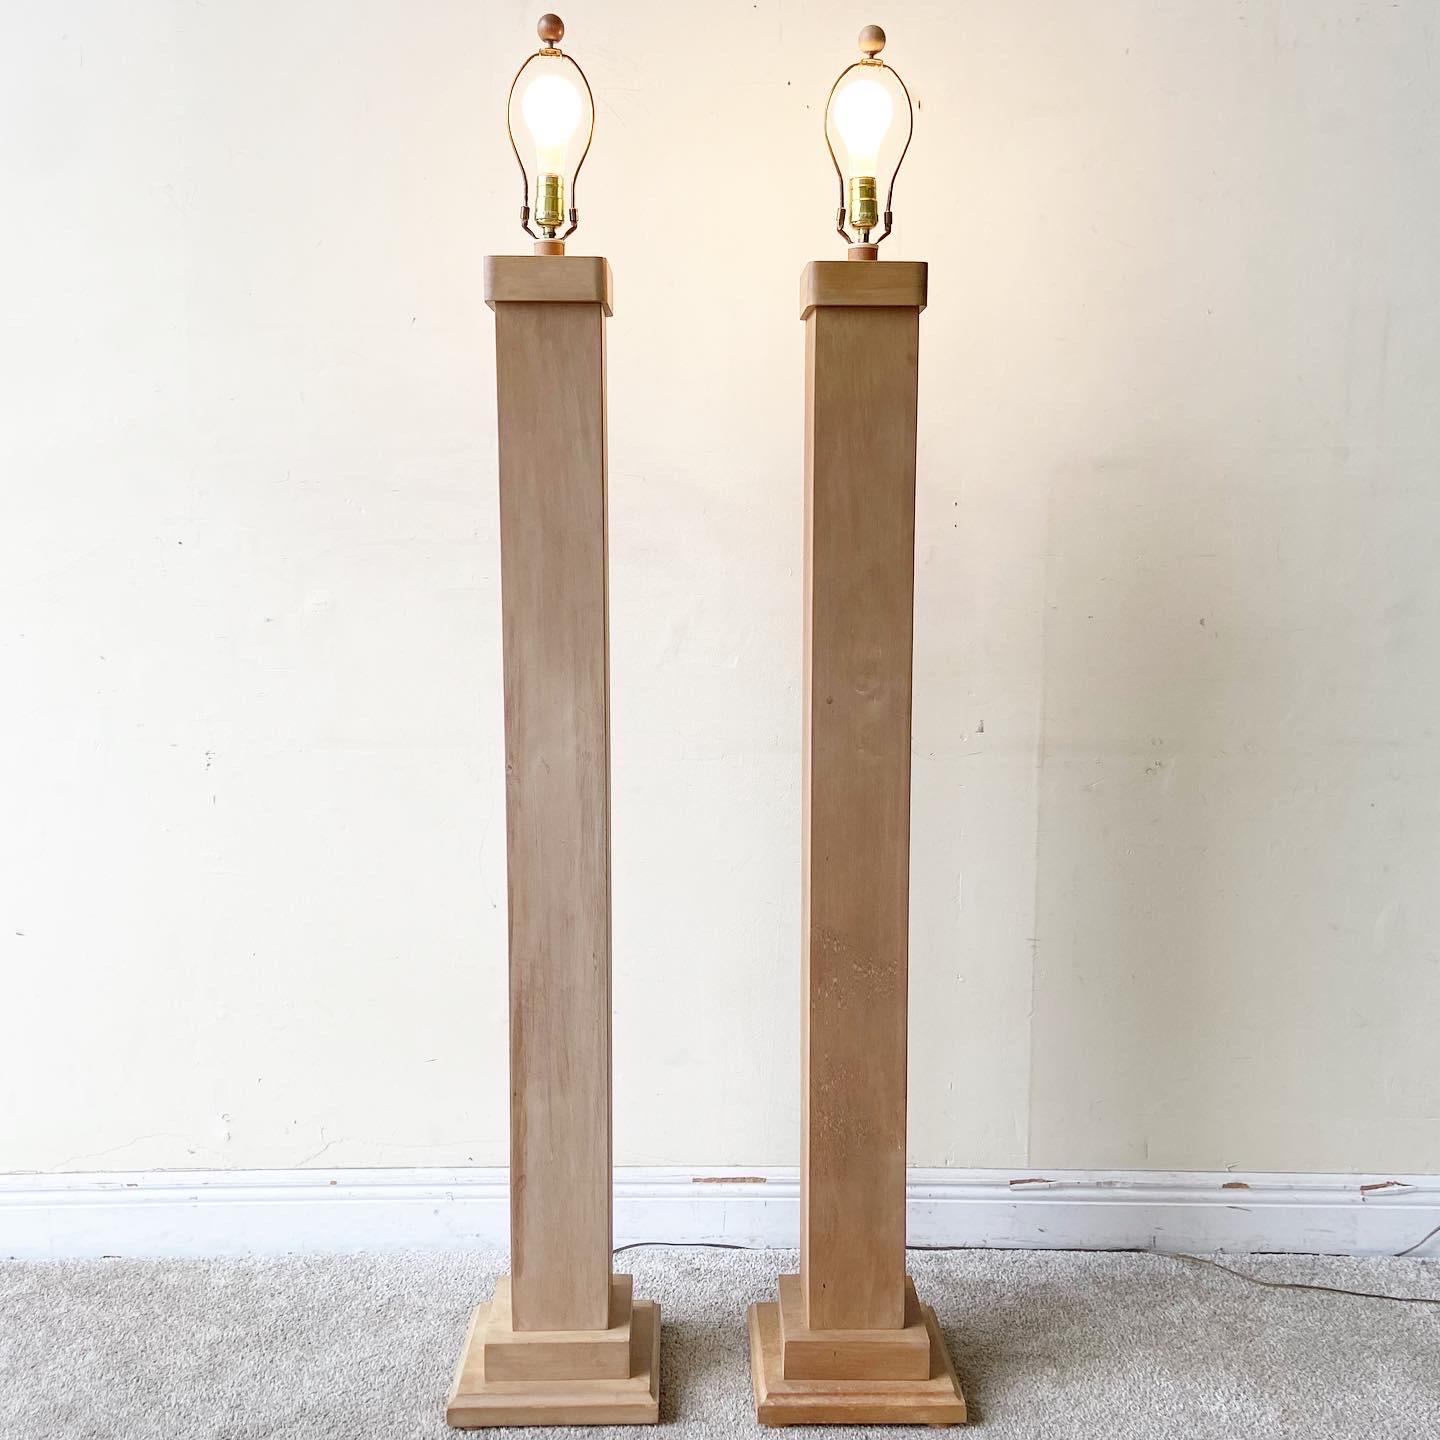 Exquisite pair of wooden pillar floor lamps. Each feature an organic tone column body.

Additional information:
Material: Wood
Color: Brown
Style: Mid-Century Modern, Organic
Time Period: 1970s
Place of origin: USA
Dimension: 10